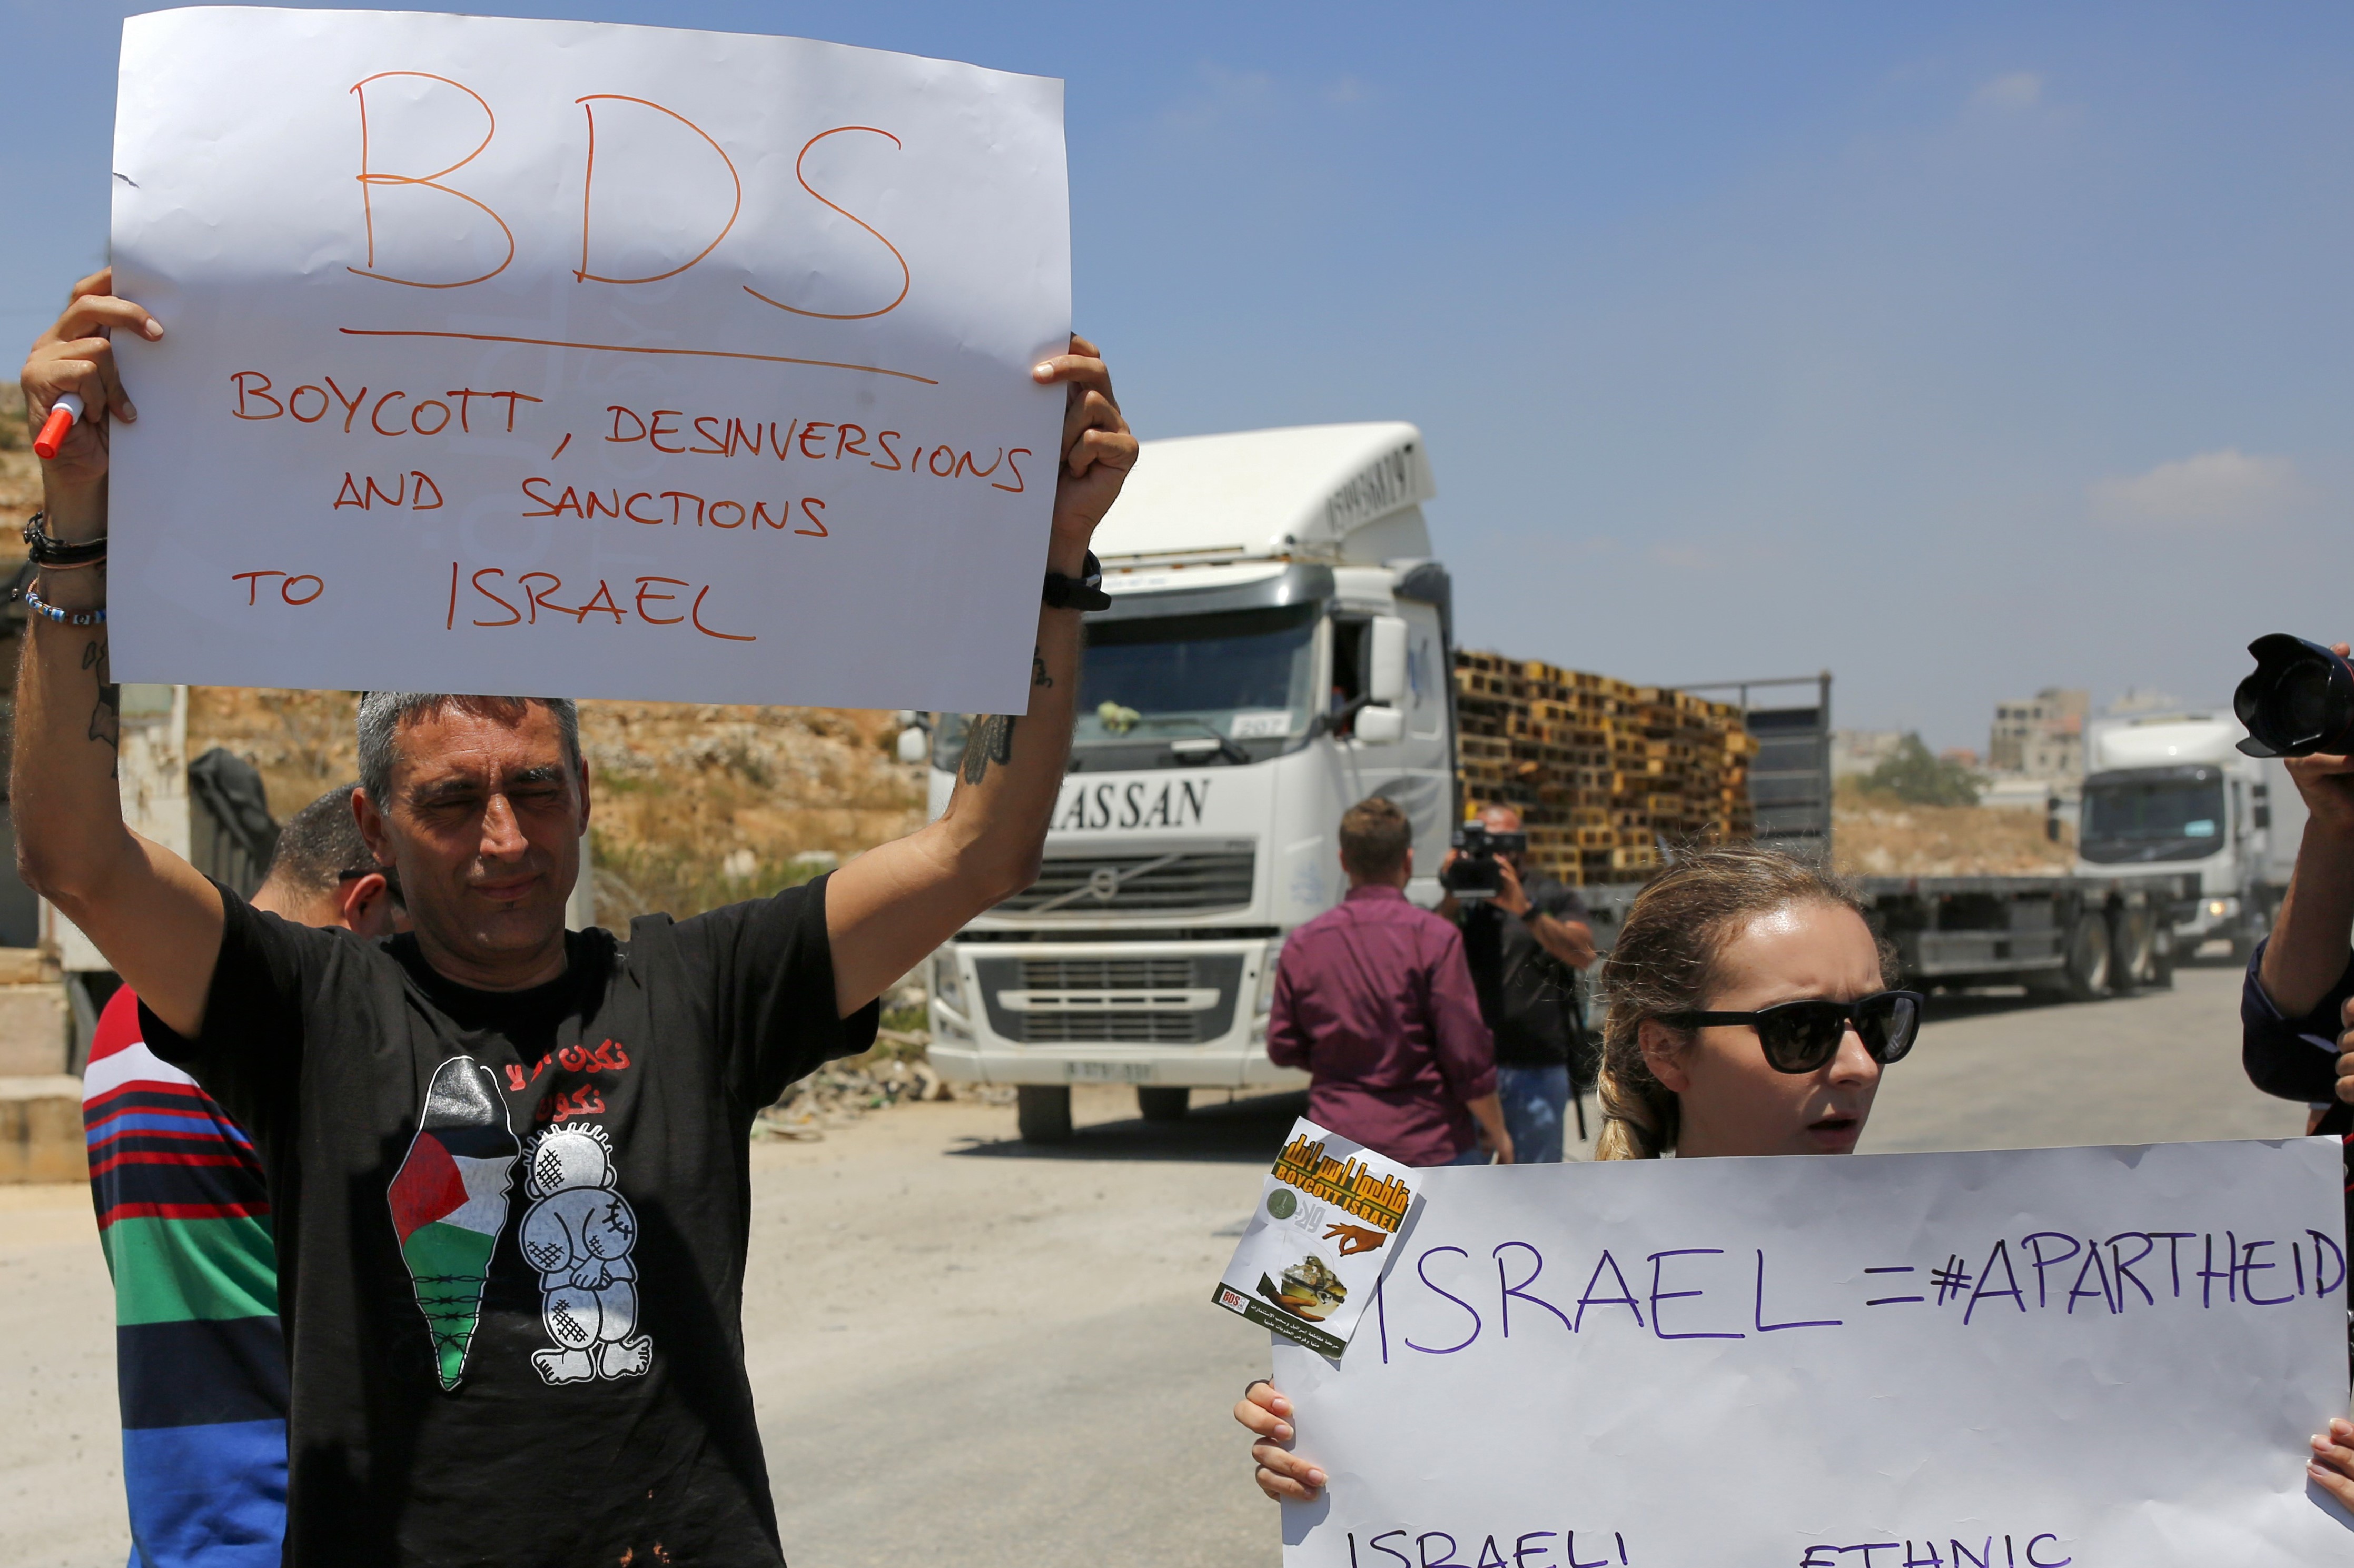    Palestinians demonstrate at the Ofer Israeli checkpoint near Ramallah, through which Israeli goods are usually transported to the West Bank, calling on Palestinians to boycott such imports, on August 6, 2019